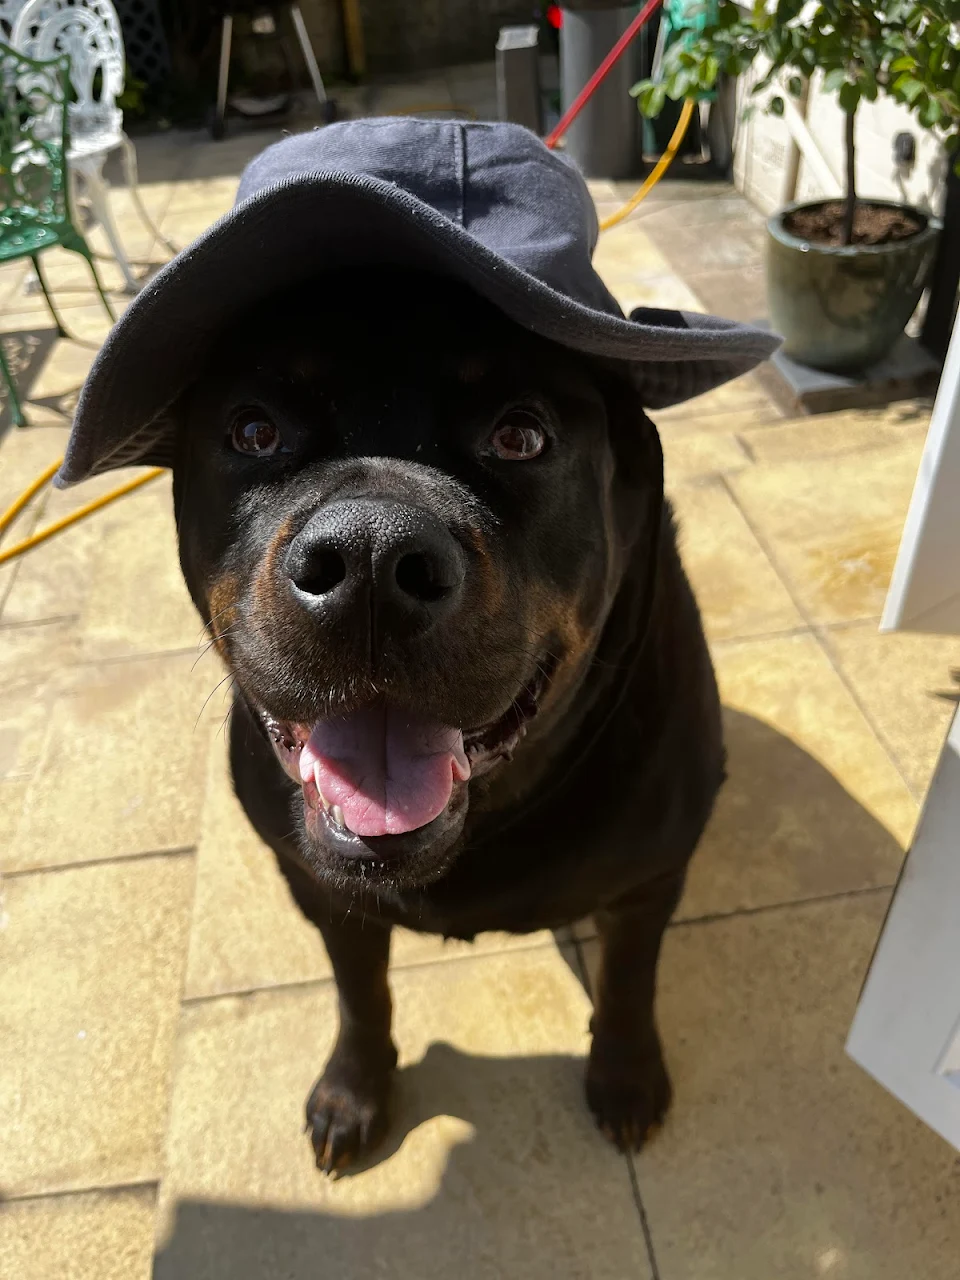 Kylo the soft rottie encourages you to wear a hat and wear sun cream in this hot weather